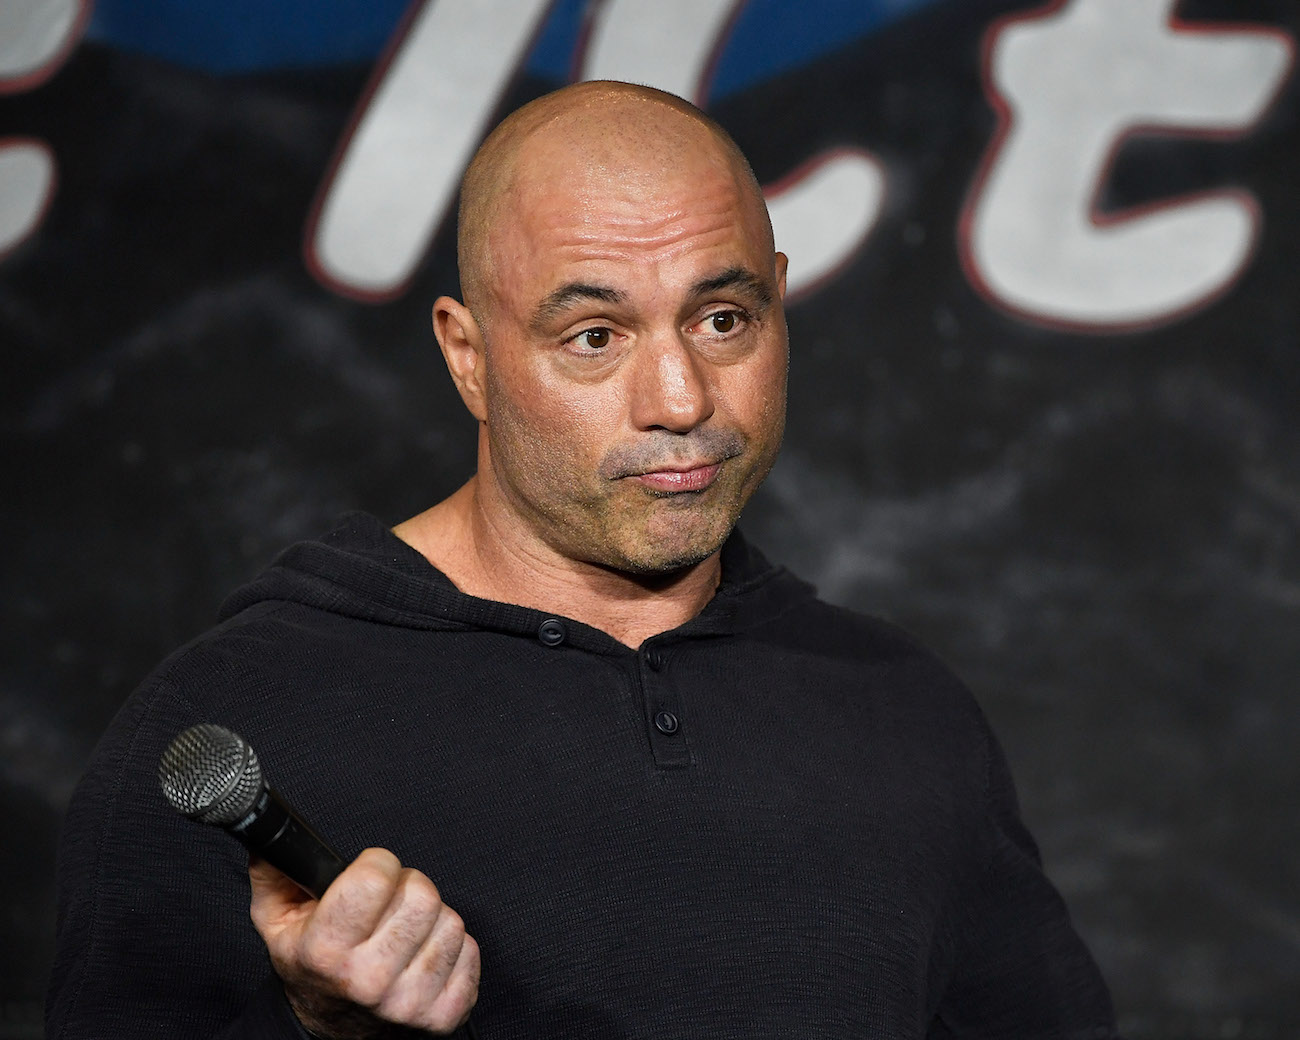 Joe Rogan talking to an audience during his appearance at The Ice House Comedy Club in 2017.